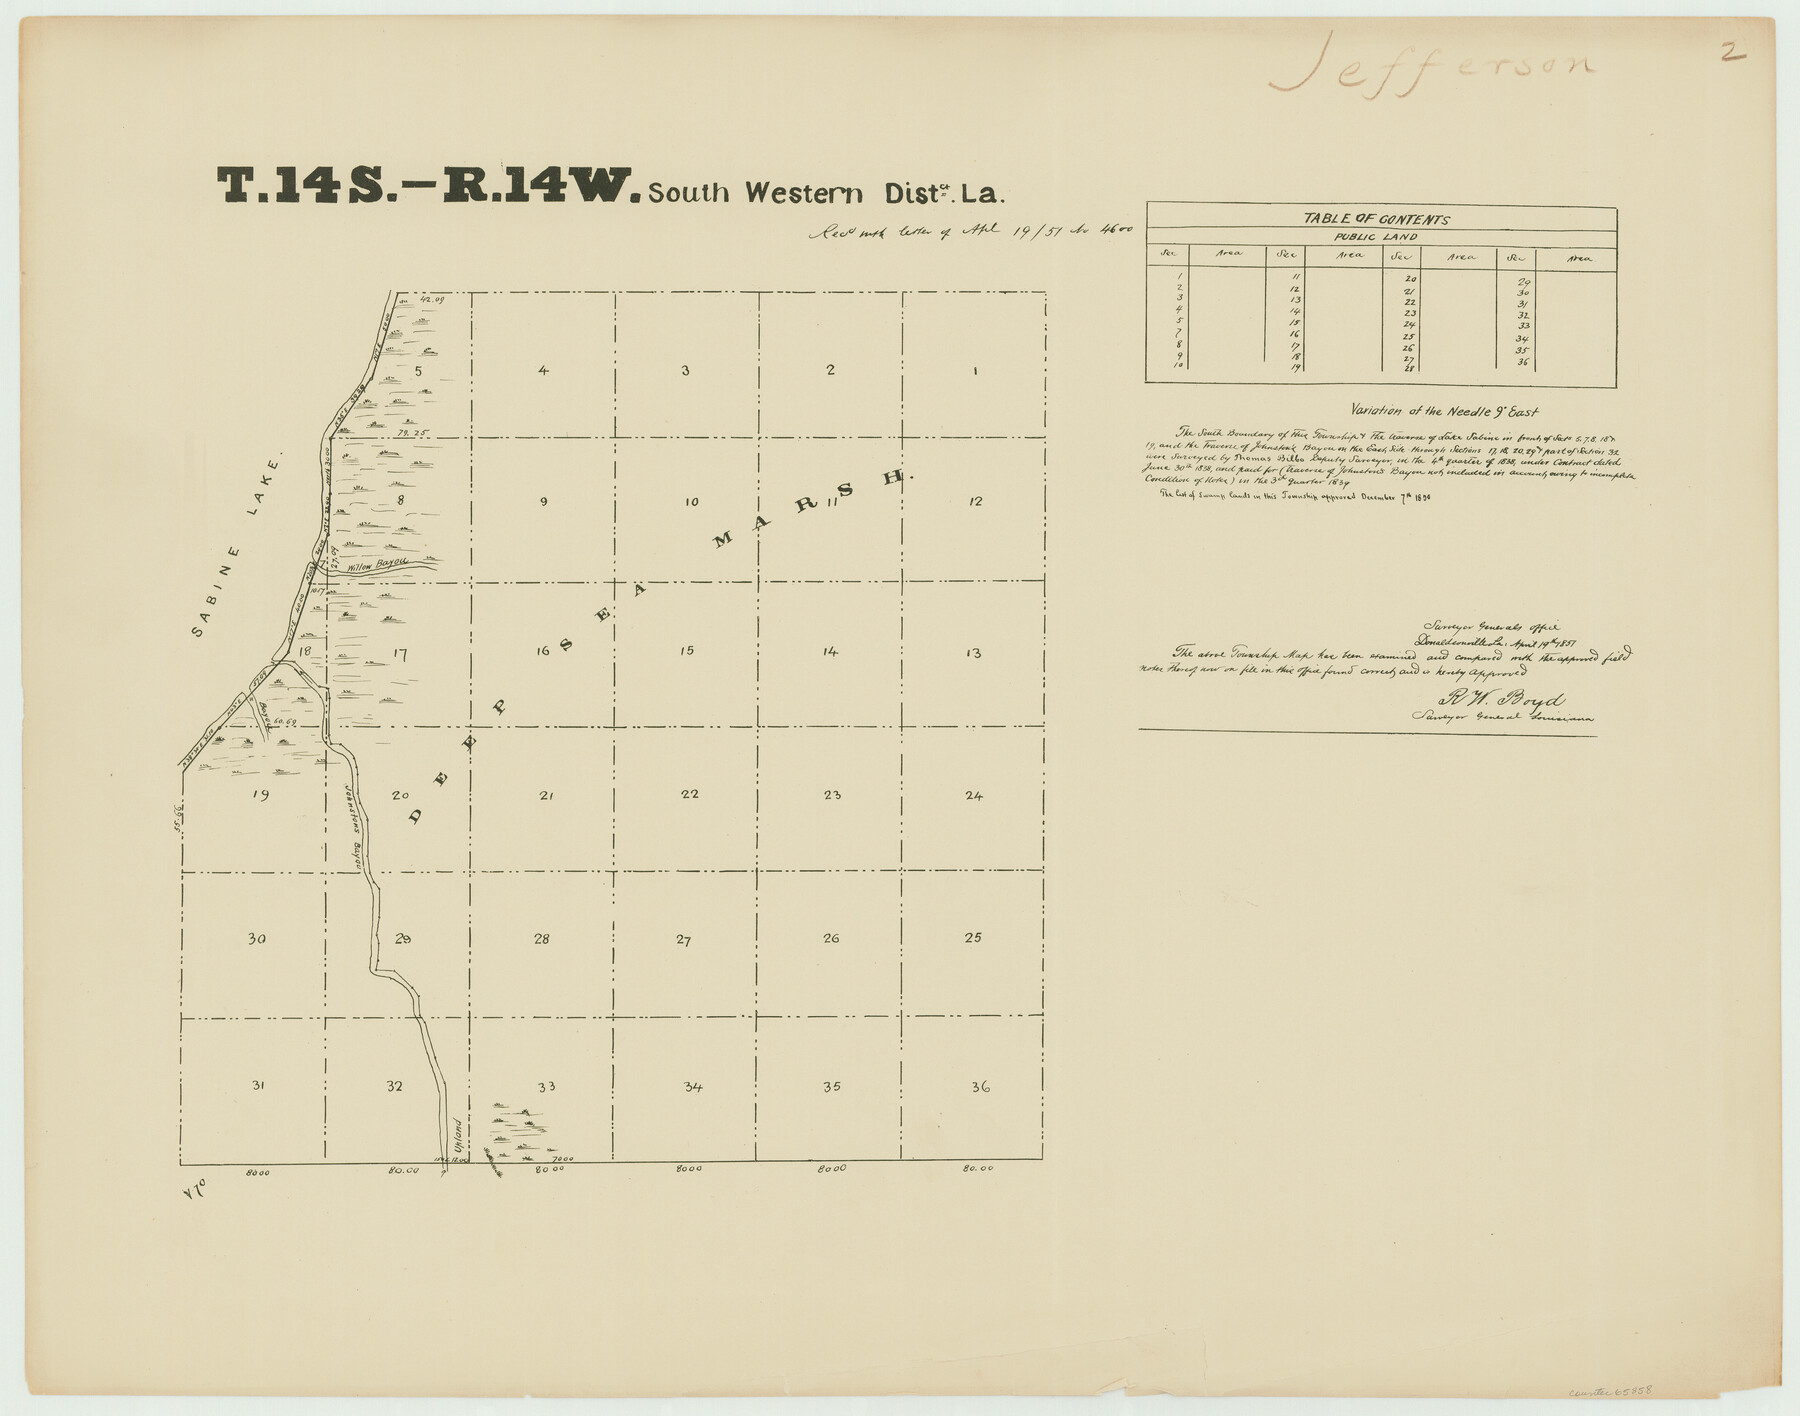 65858, Township 14 South Range 14 West, South Western District, Louisiana, General Map Collection